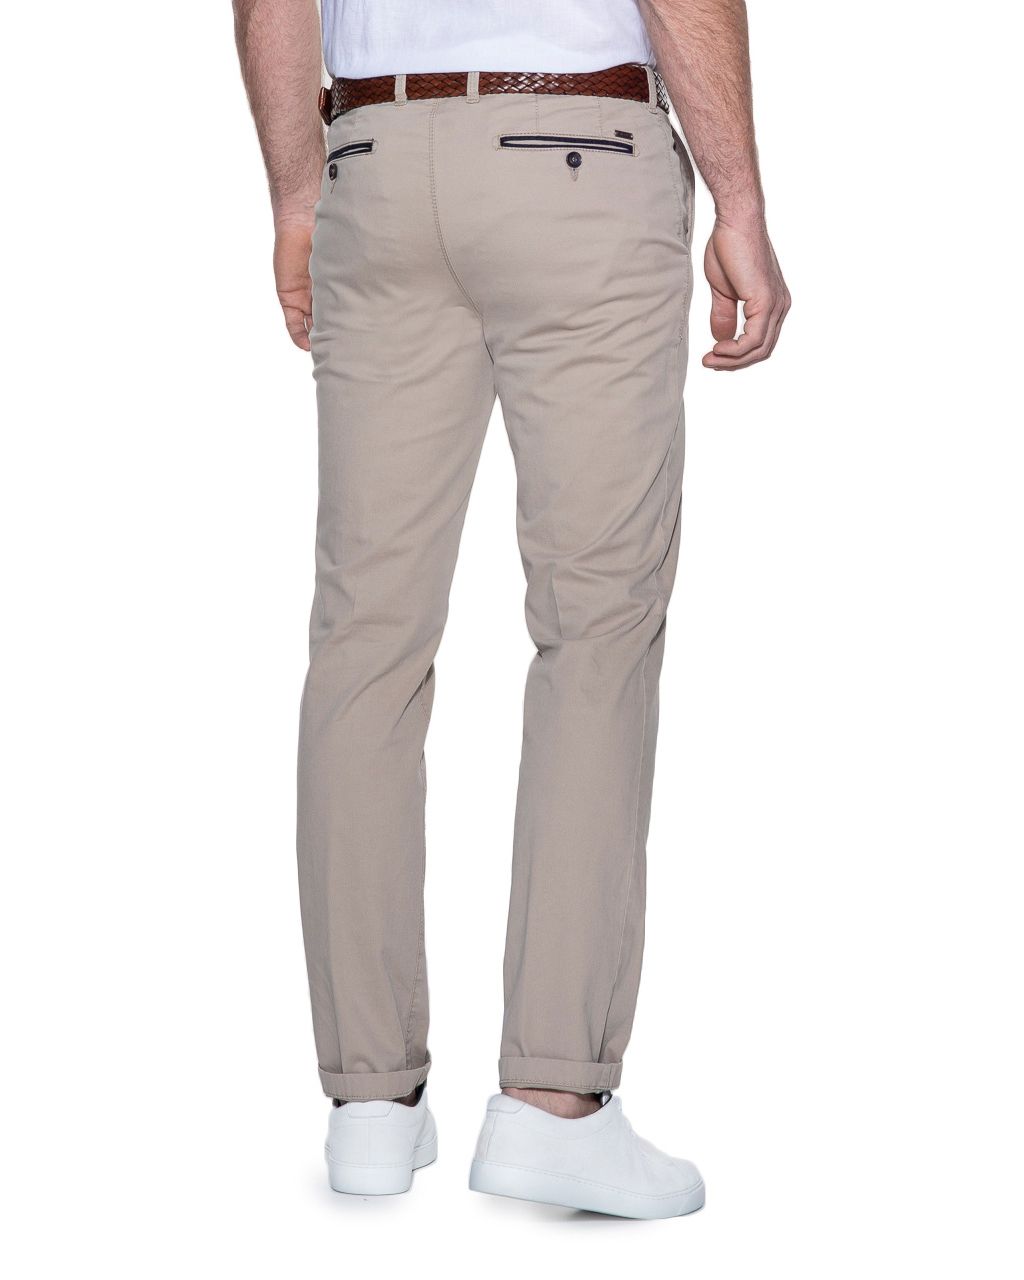 Campbell Classic Chino Beige 036406-810-24